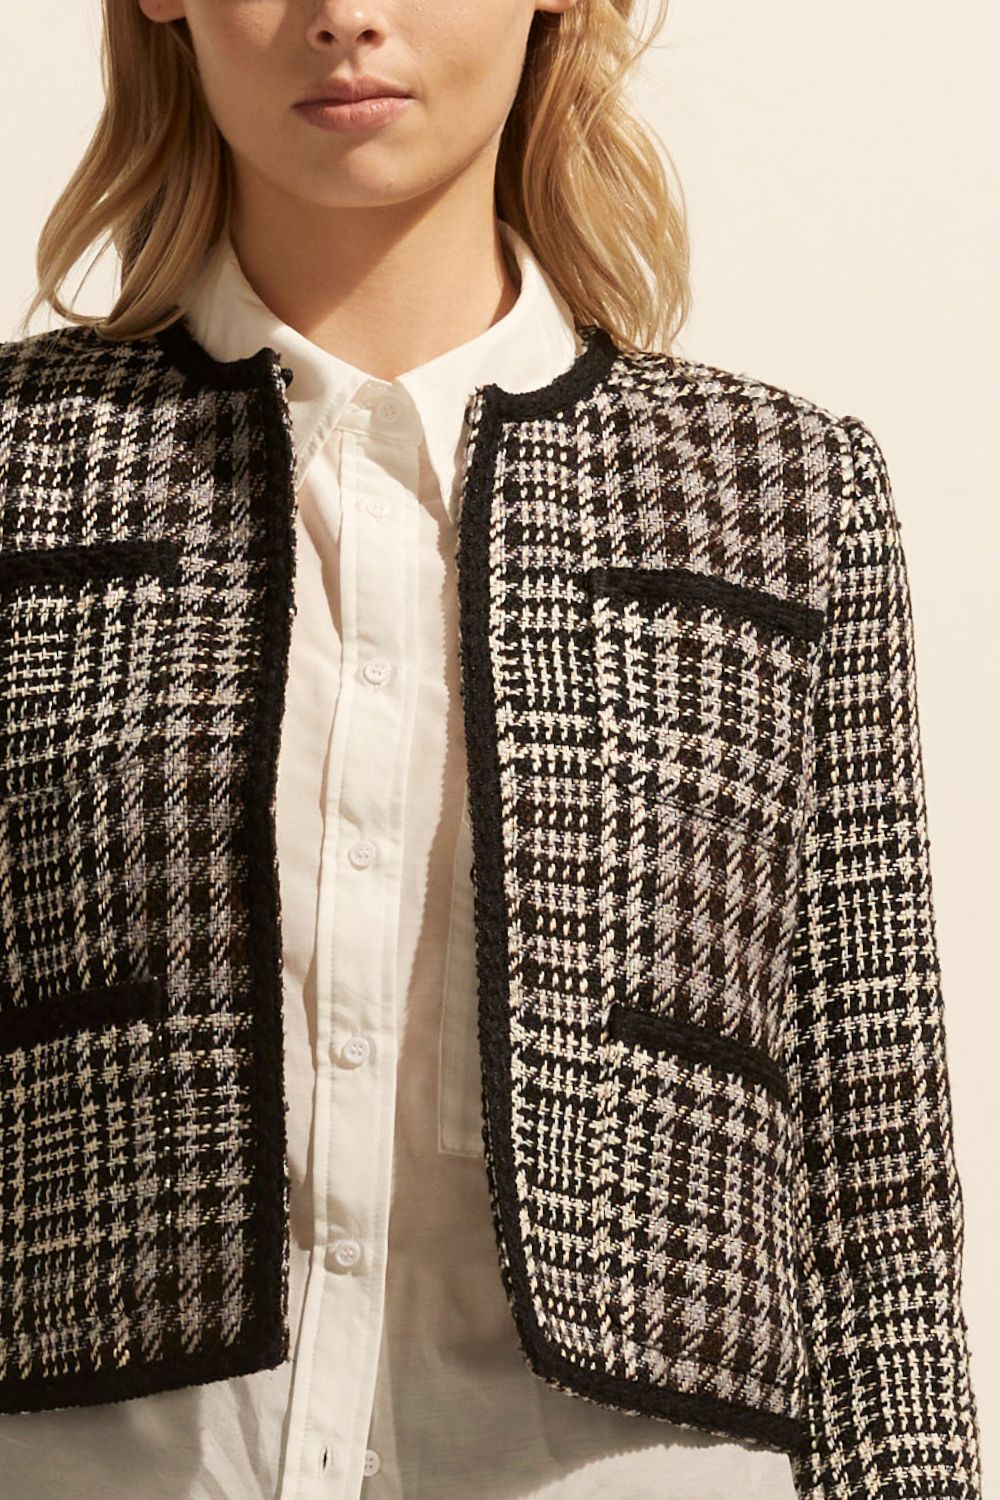 Patron Jacket in Check Boucle